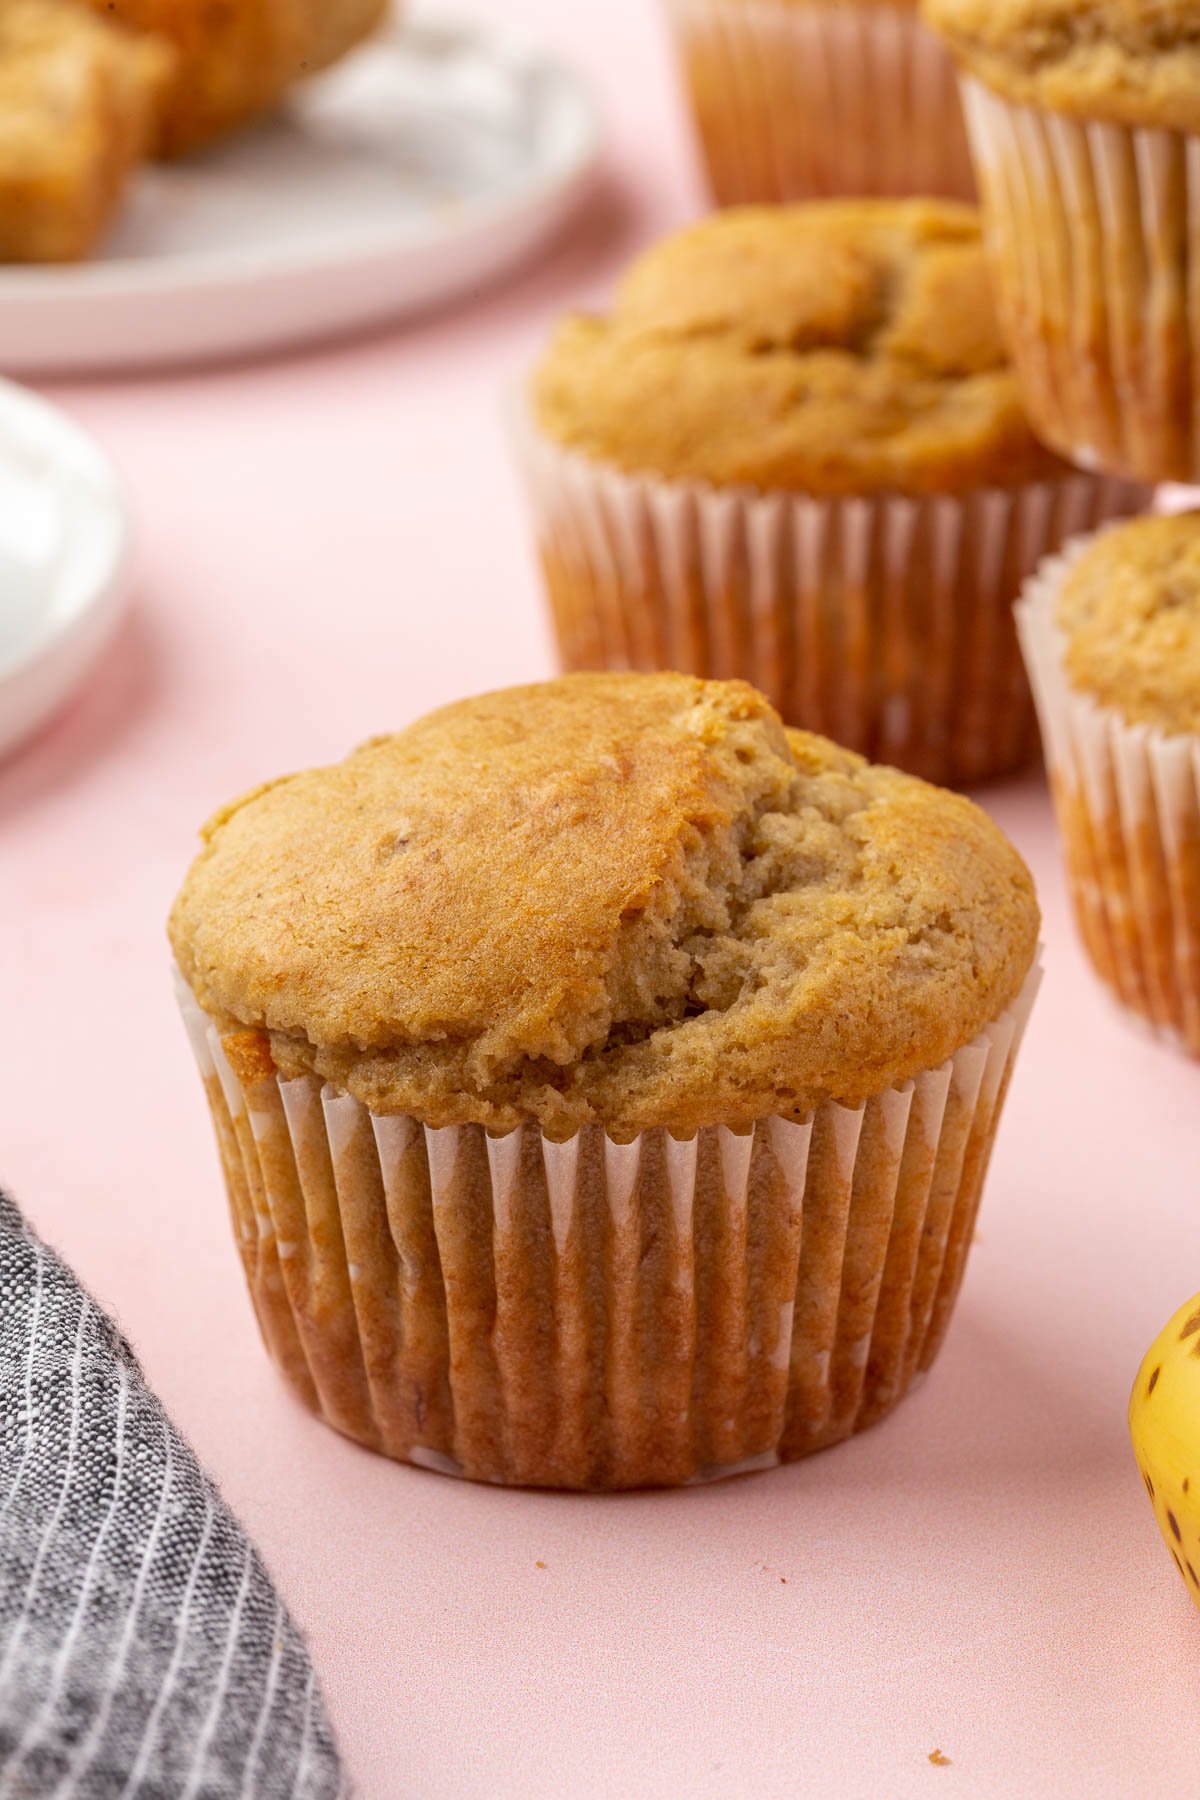 A close up of a gluten-free banana muffin with additional muffins in the background.